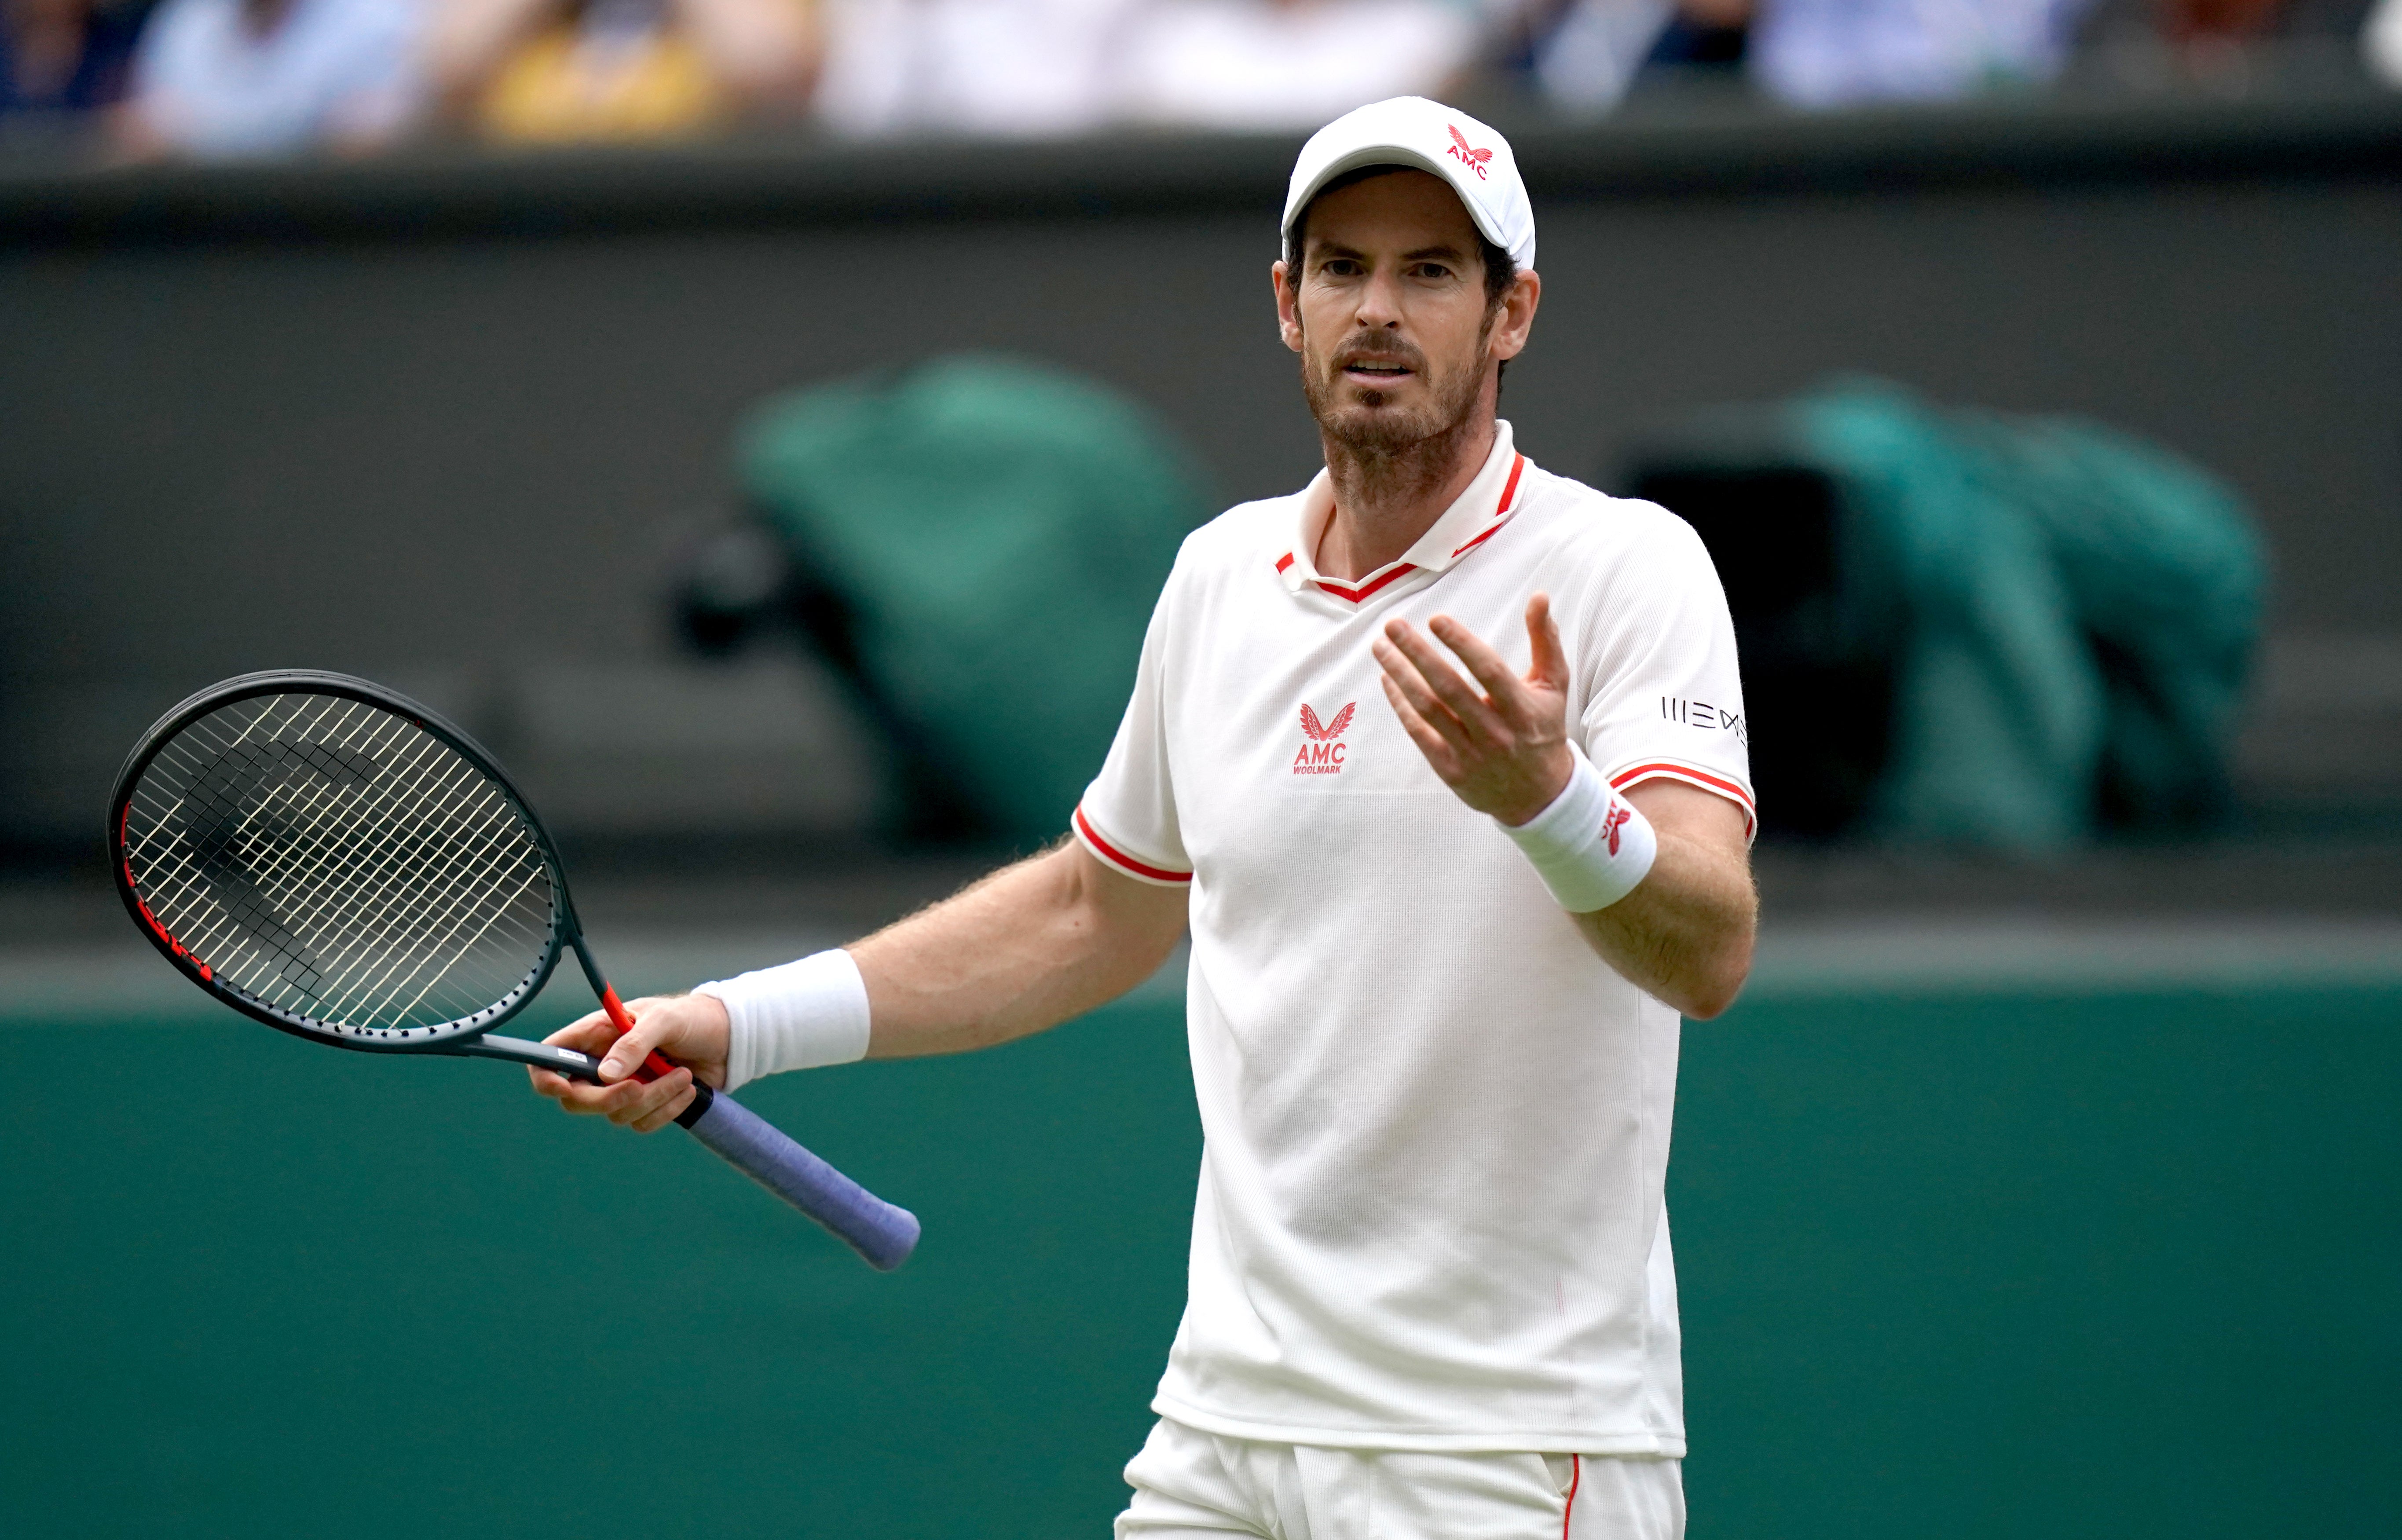 Andy Murray's first round opponent at Tokyo has been revealed